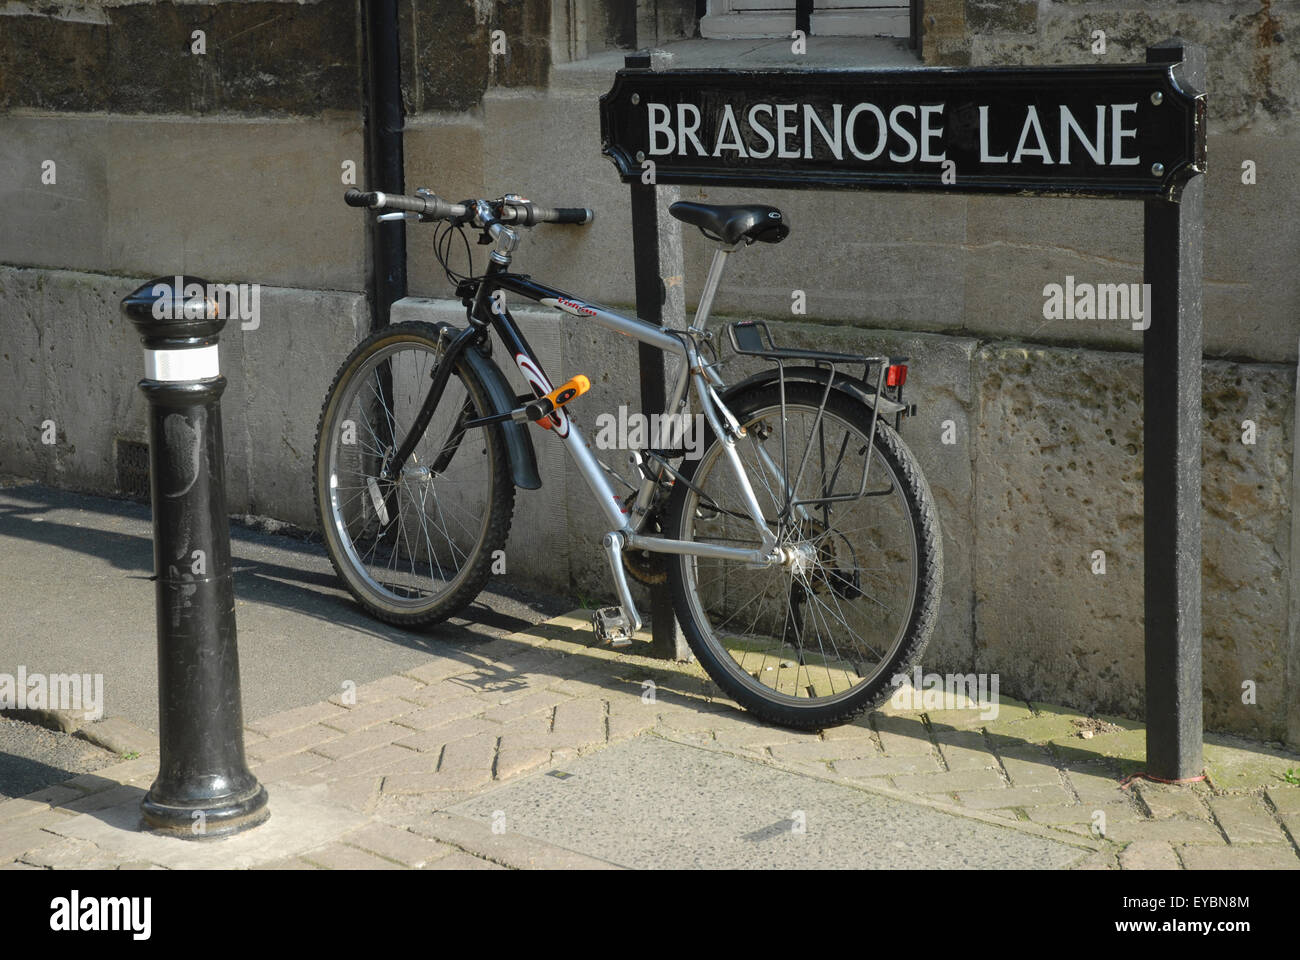 Bicycle chained to Brasenose Lane street sign, Oxford, Oxon, England Stock Photo